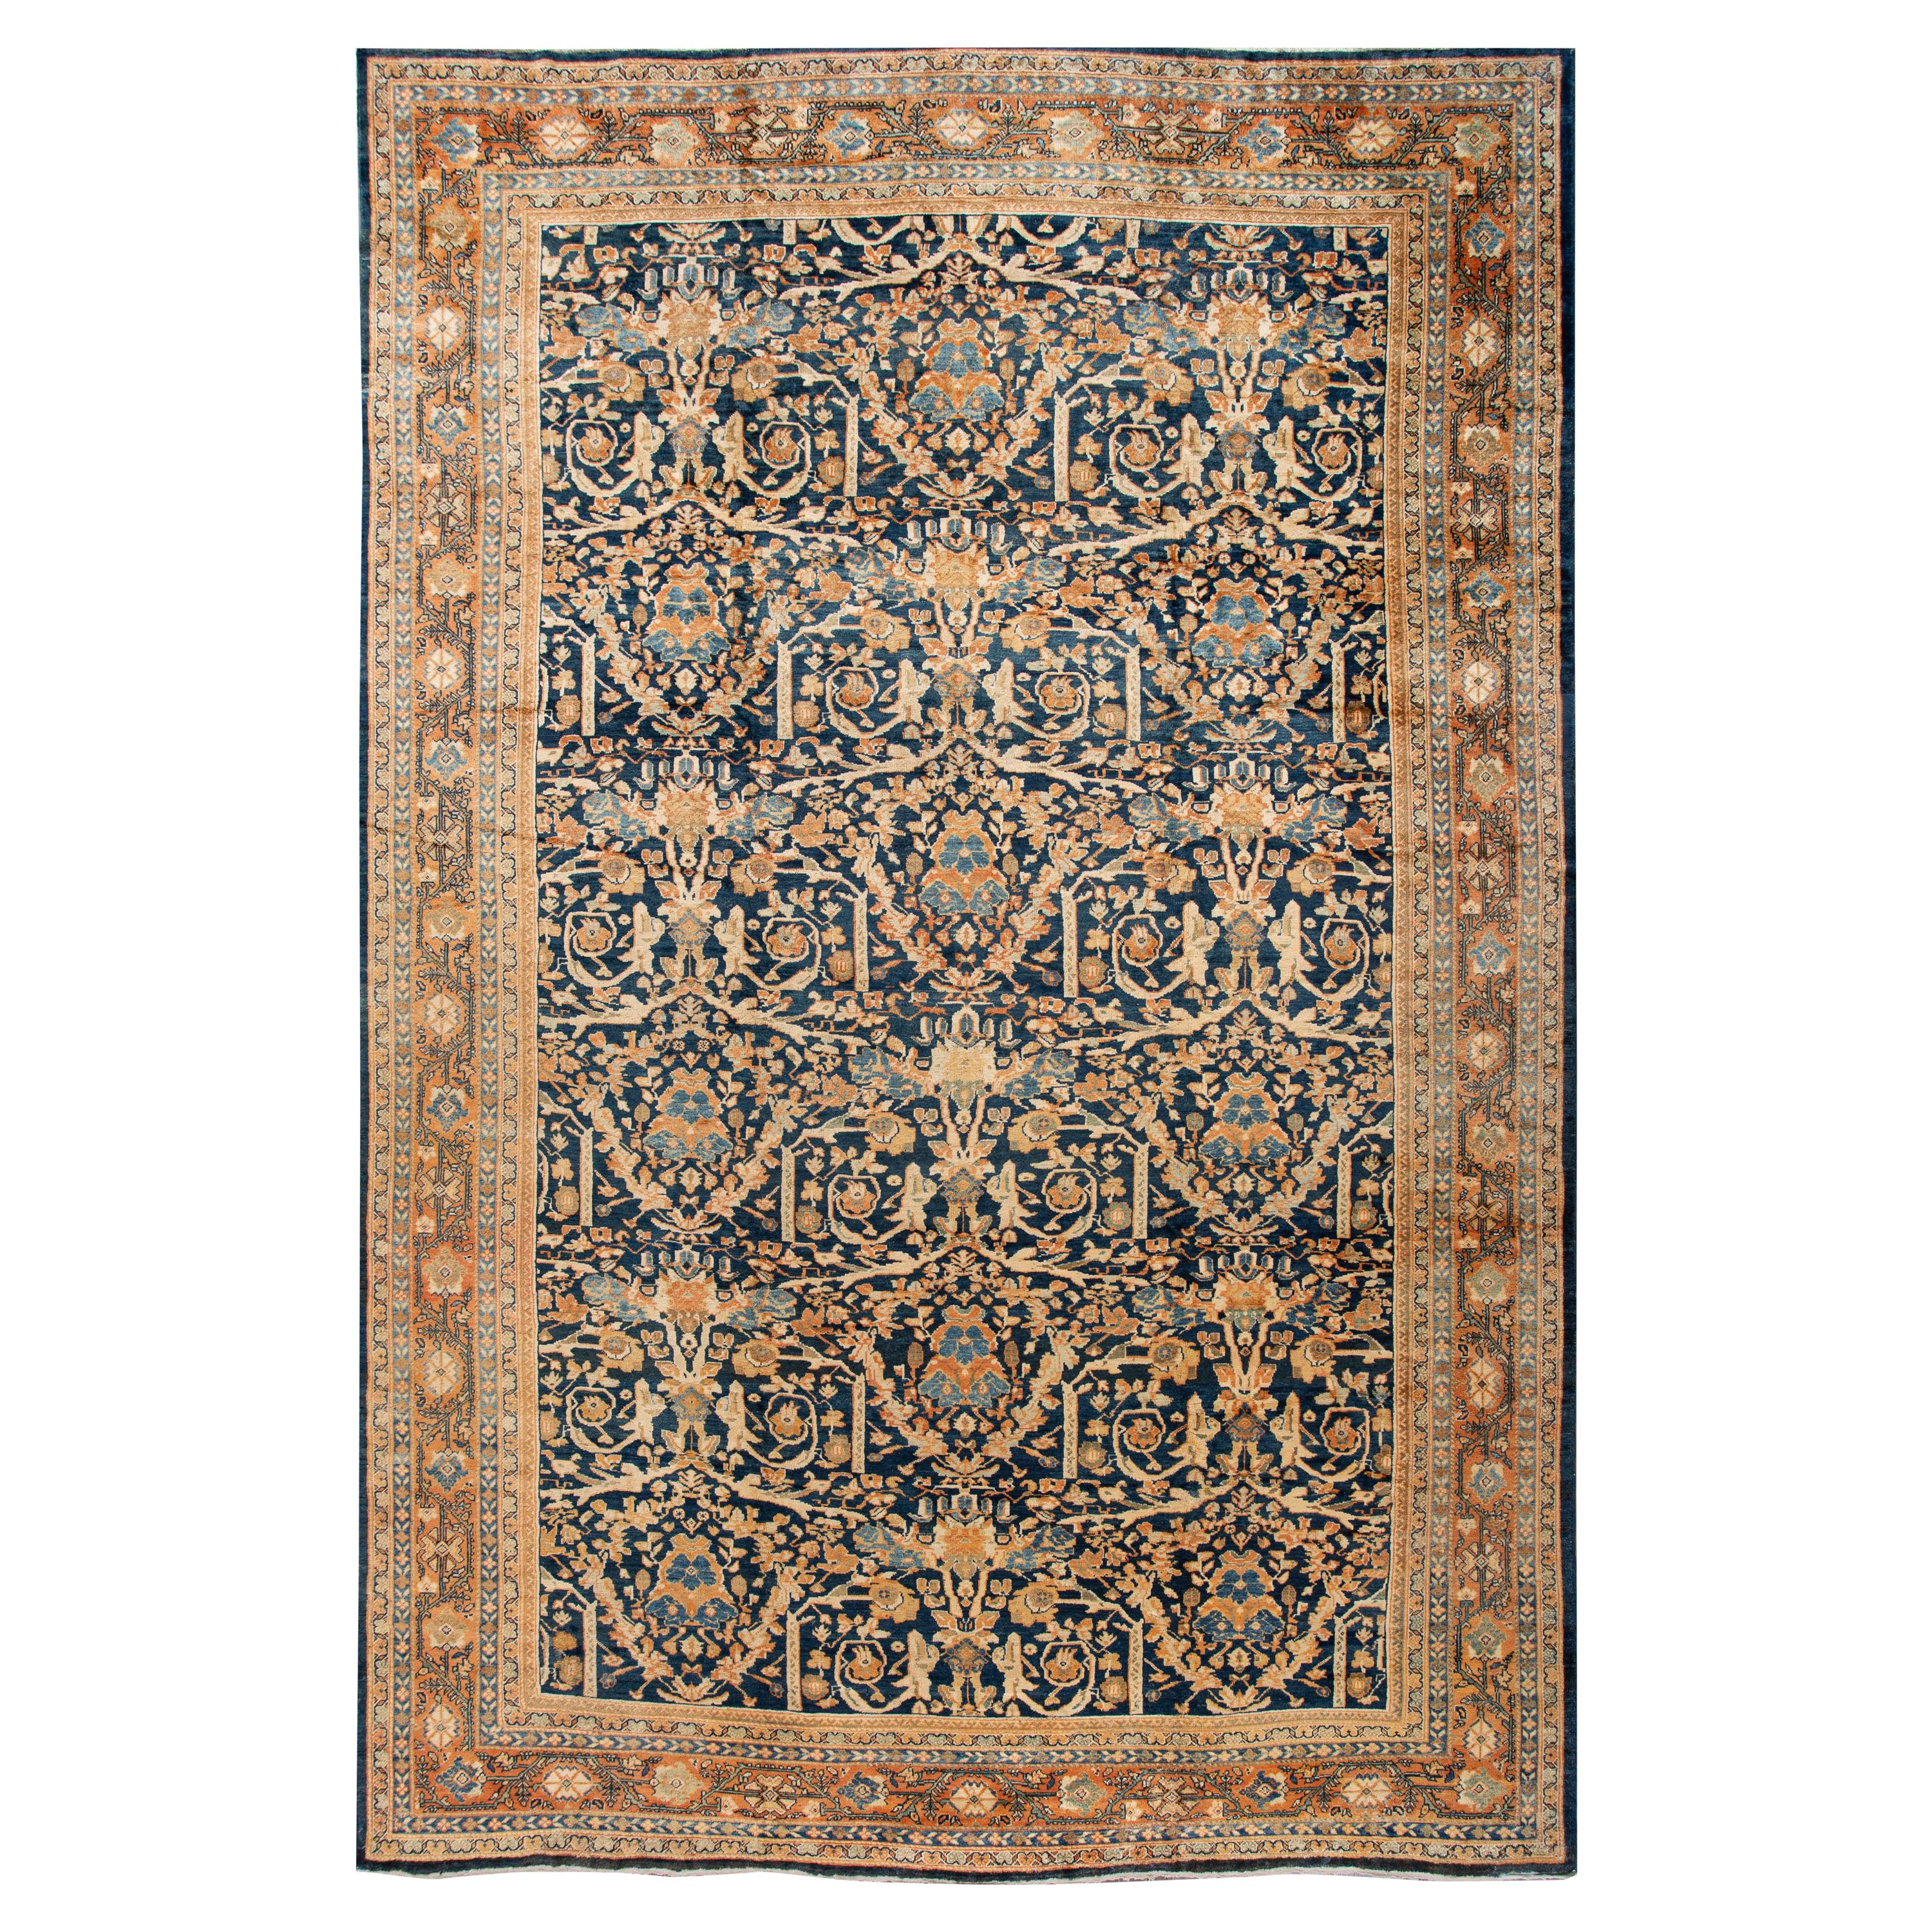 Oversize Antique Persian Mahal Blue Handmade Allover Floral Wool Rug